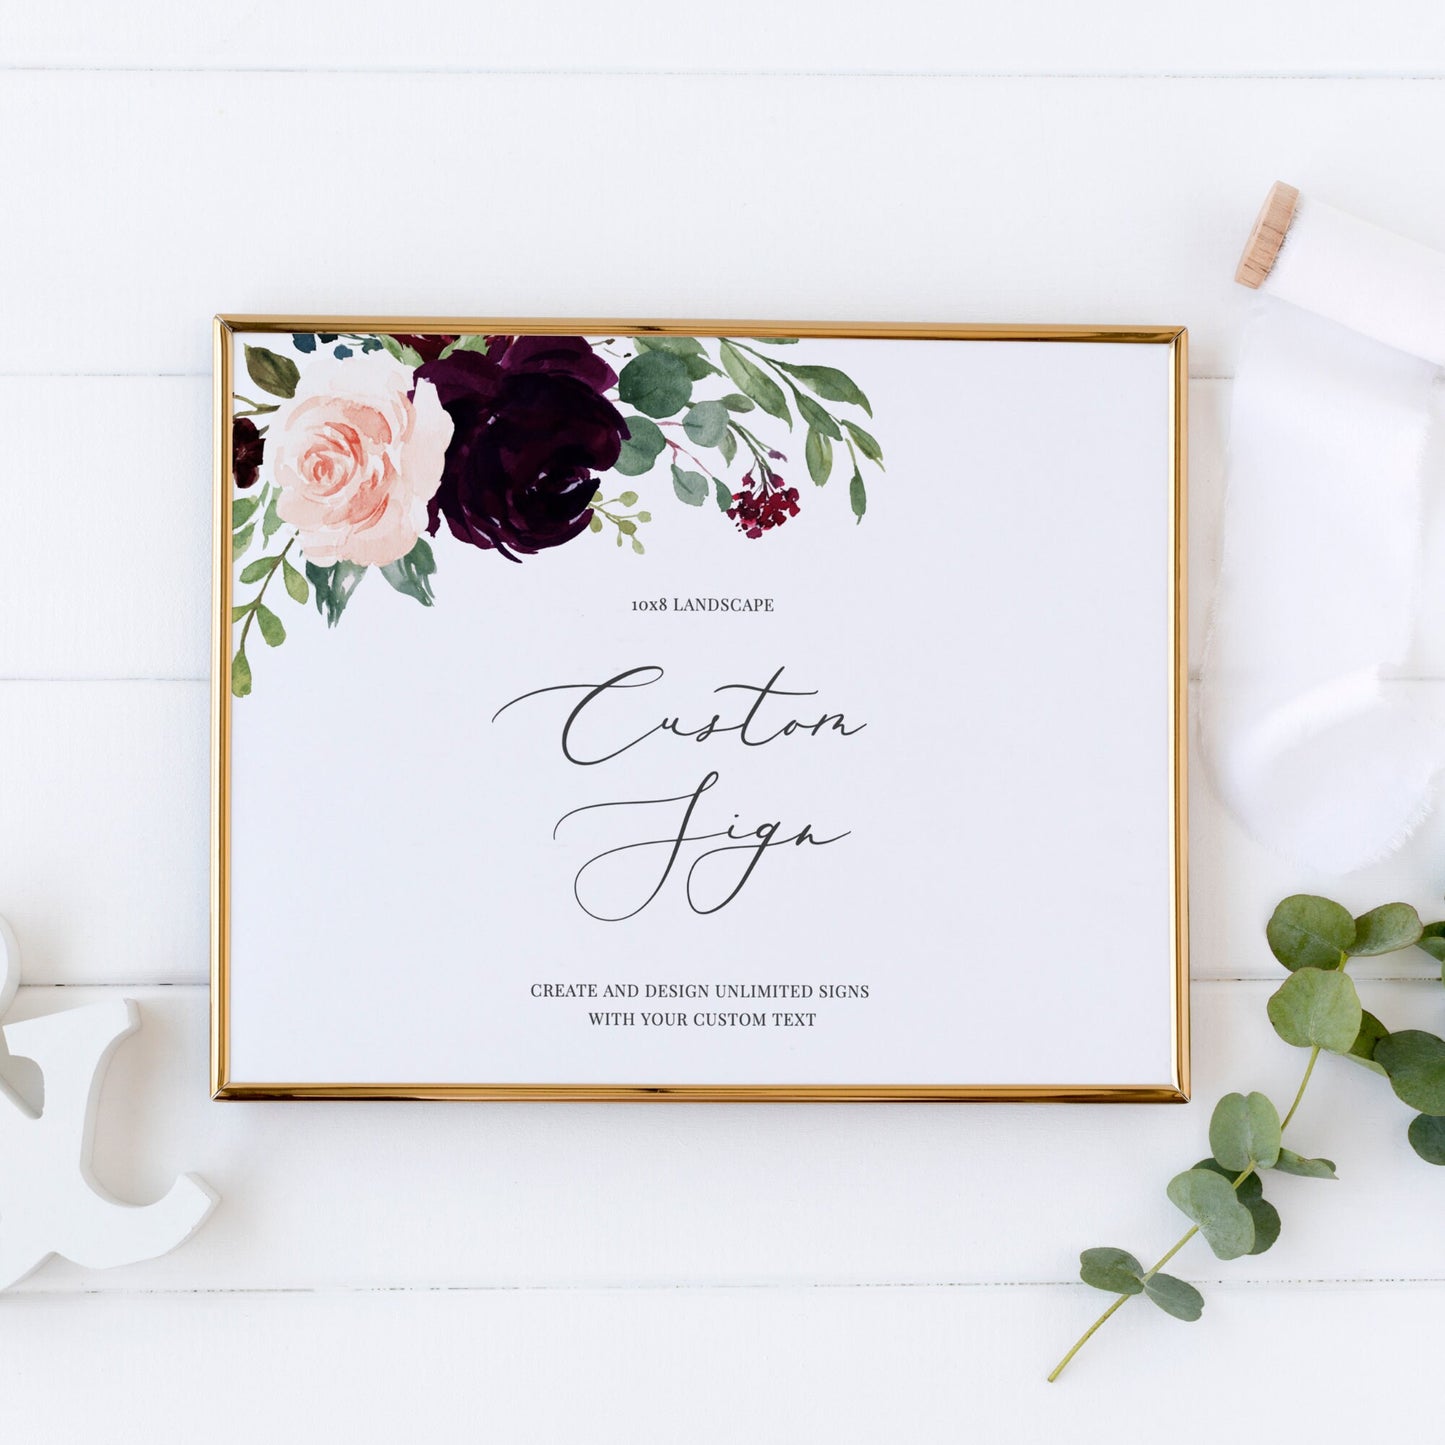 Editable Custom Wedding Sign Burgundy Floral Wedding Sign Kit Create Unlimited Signs 8x10 and 10x8 Template